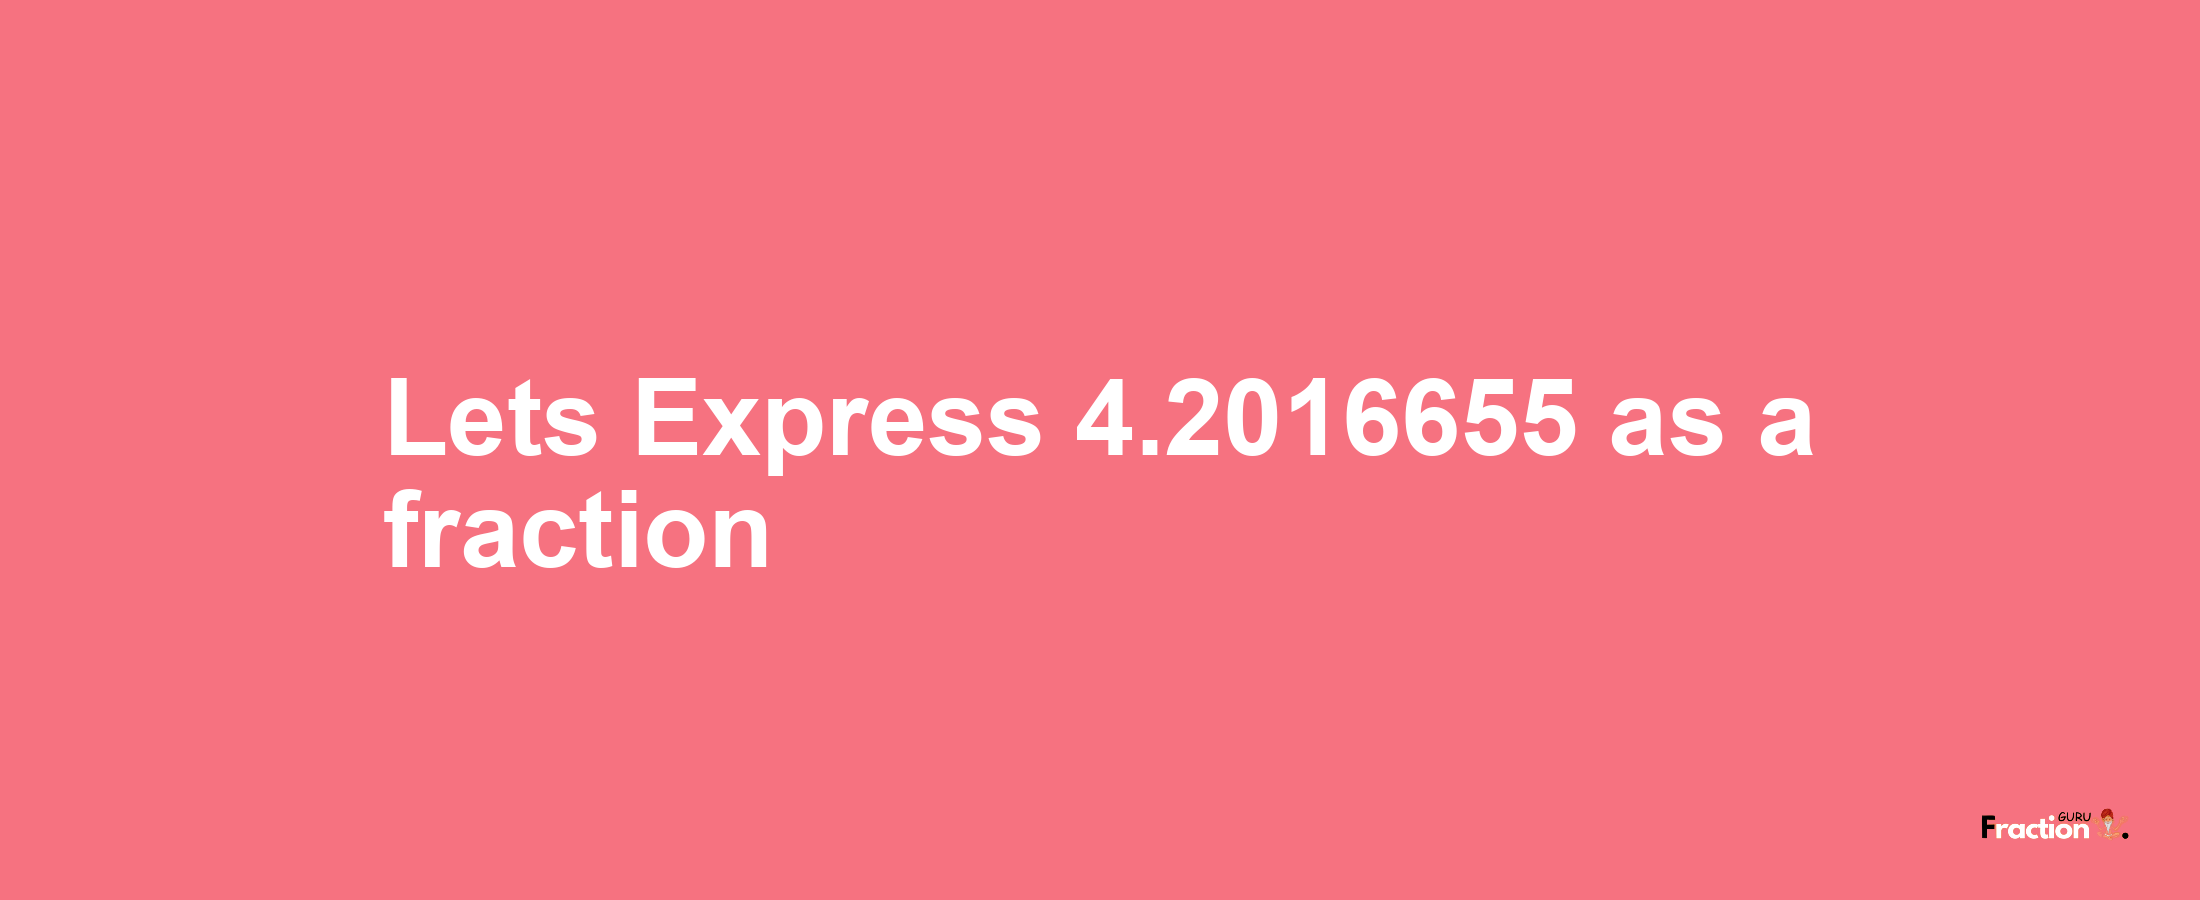 Lets Express 4.2016655 as afraction